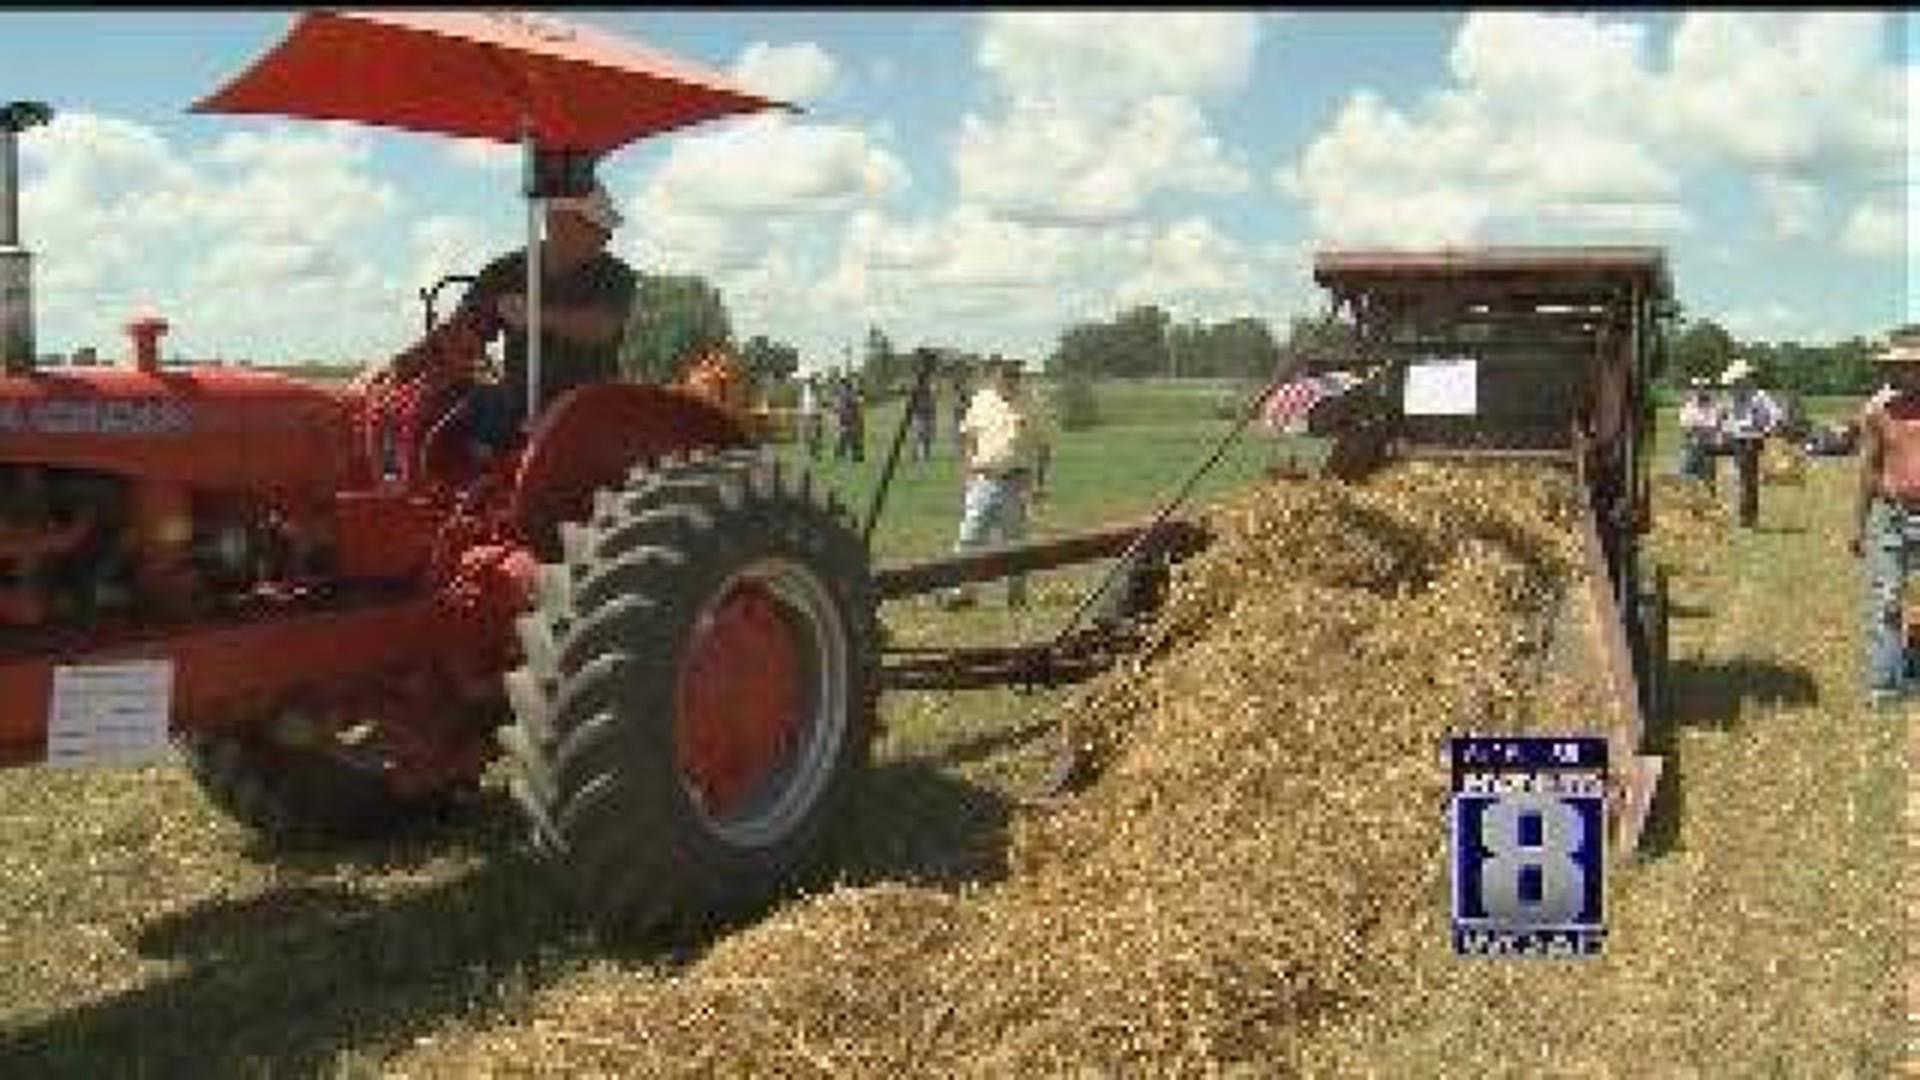 Ag in the AM: Hay Growth Slows